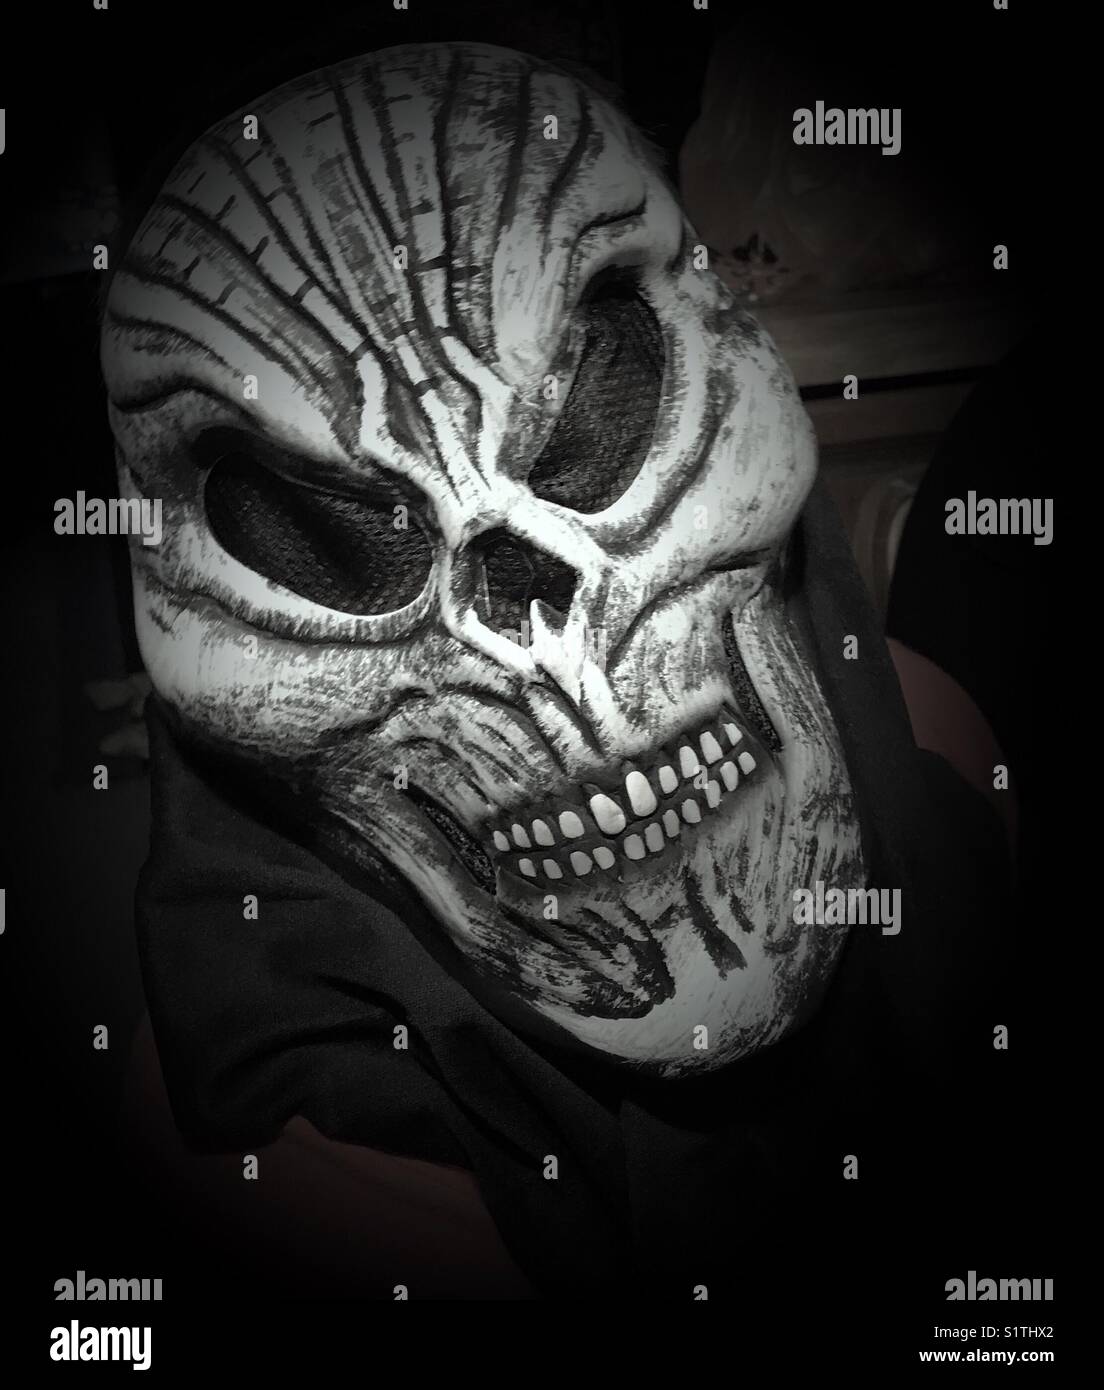 A spooky Halloween mask worn by a child. Stock Photo